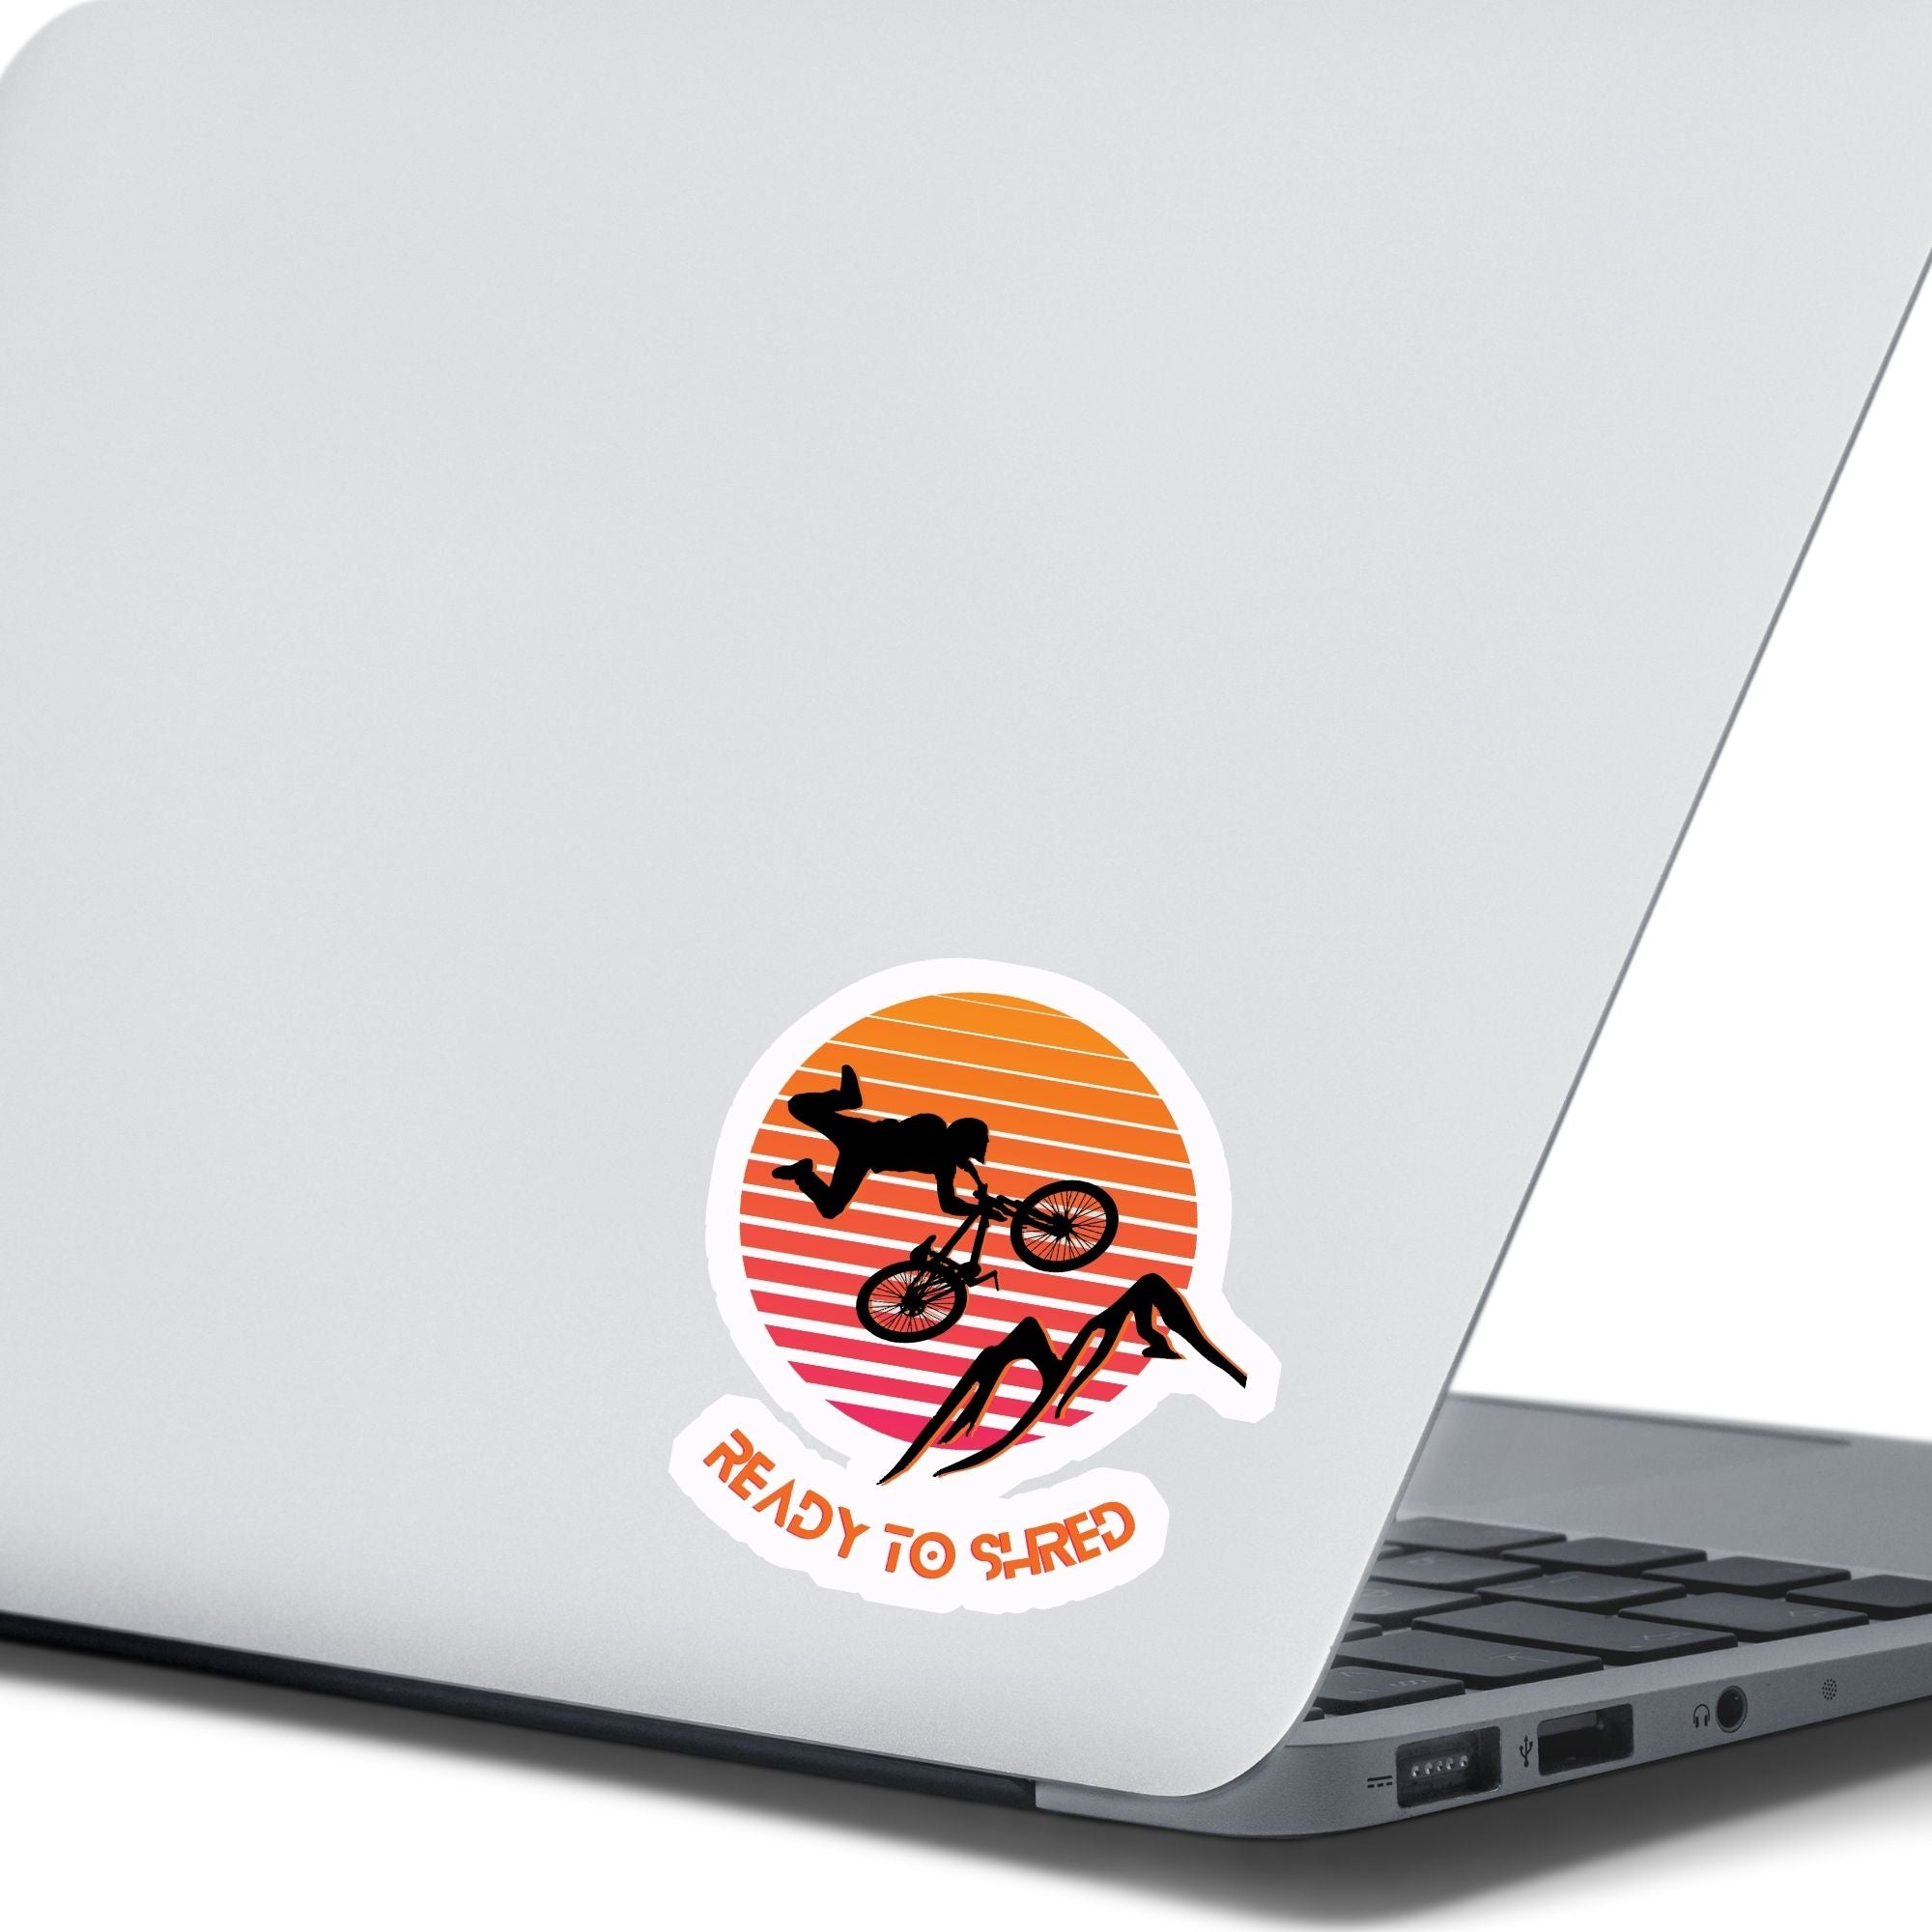 Grab your off-road bicycle and hit the trails! This individual die-cut sticker features the silhouette of a mountain biker flying above mountains, on an orange and white gradient background, with the words "Ready to Shred" below. This image shows the mountain bike sticker on the back of an open laptop.